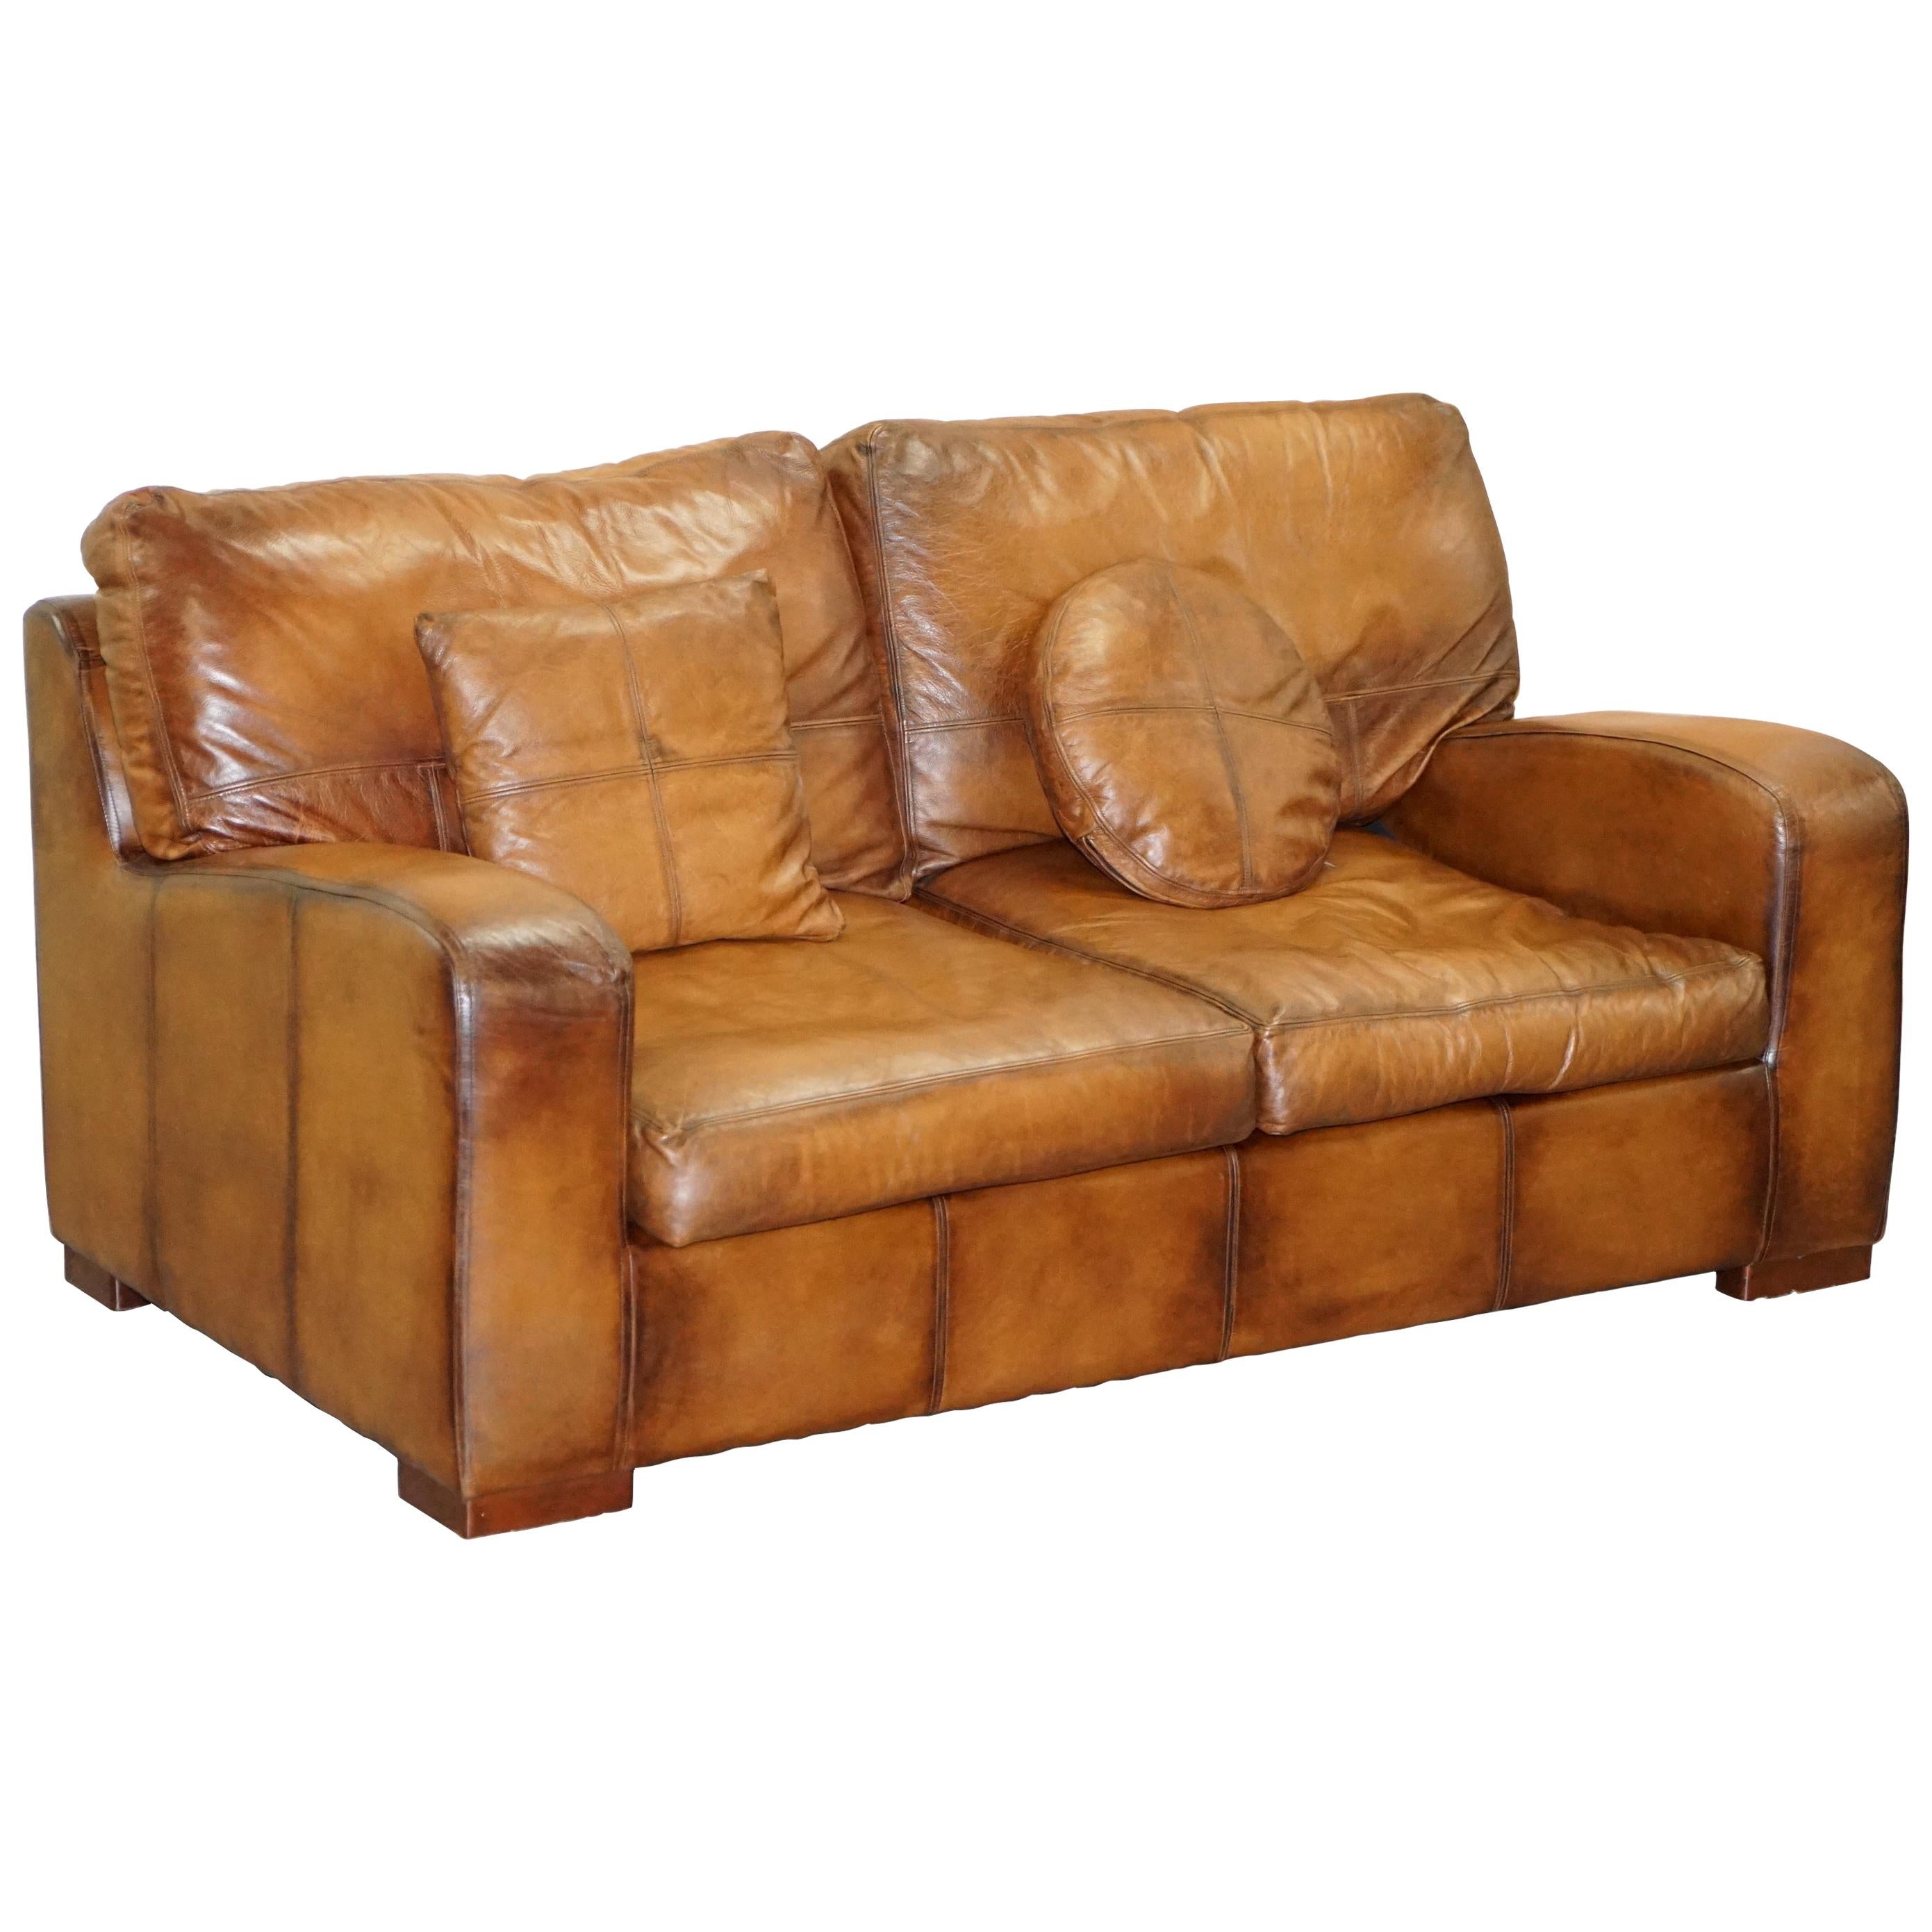 What color goes with a brown leather couch?